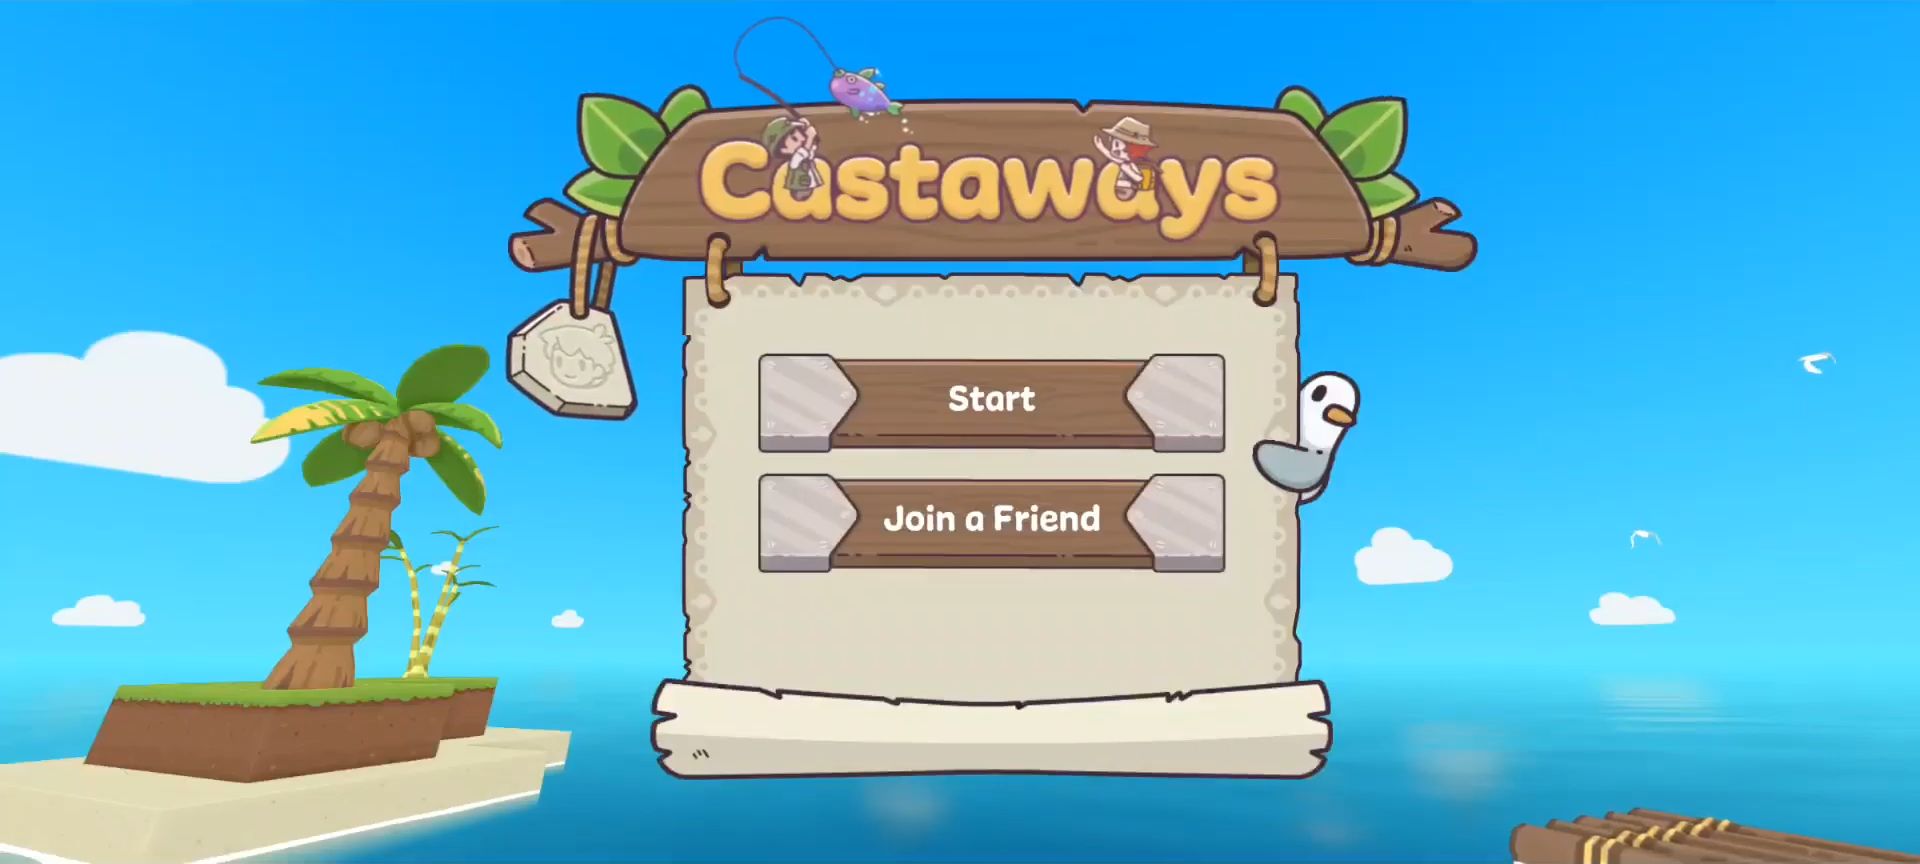 Full version of Android Survival game apk Castaways for tablet and phone.